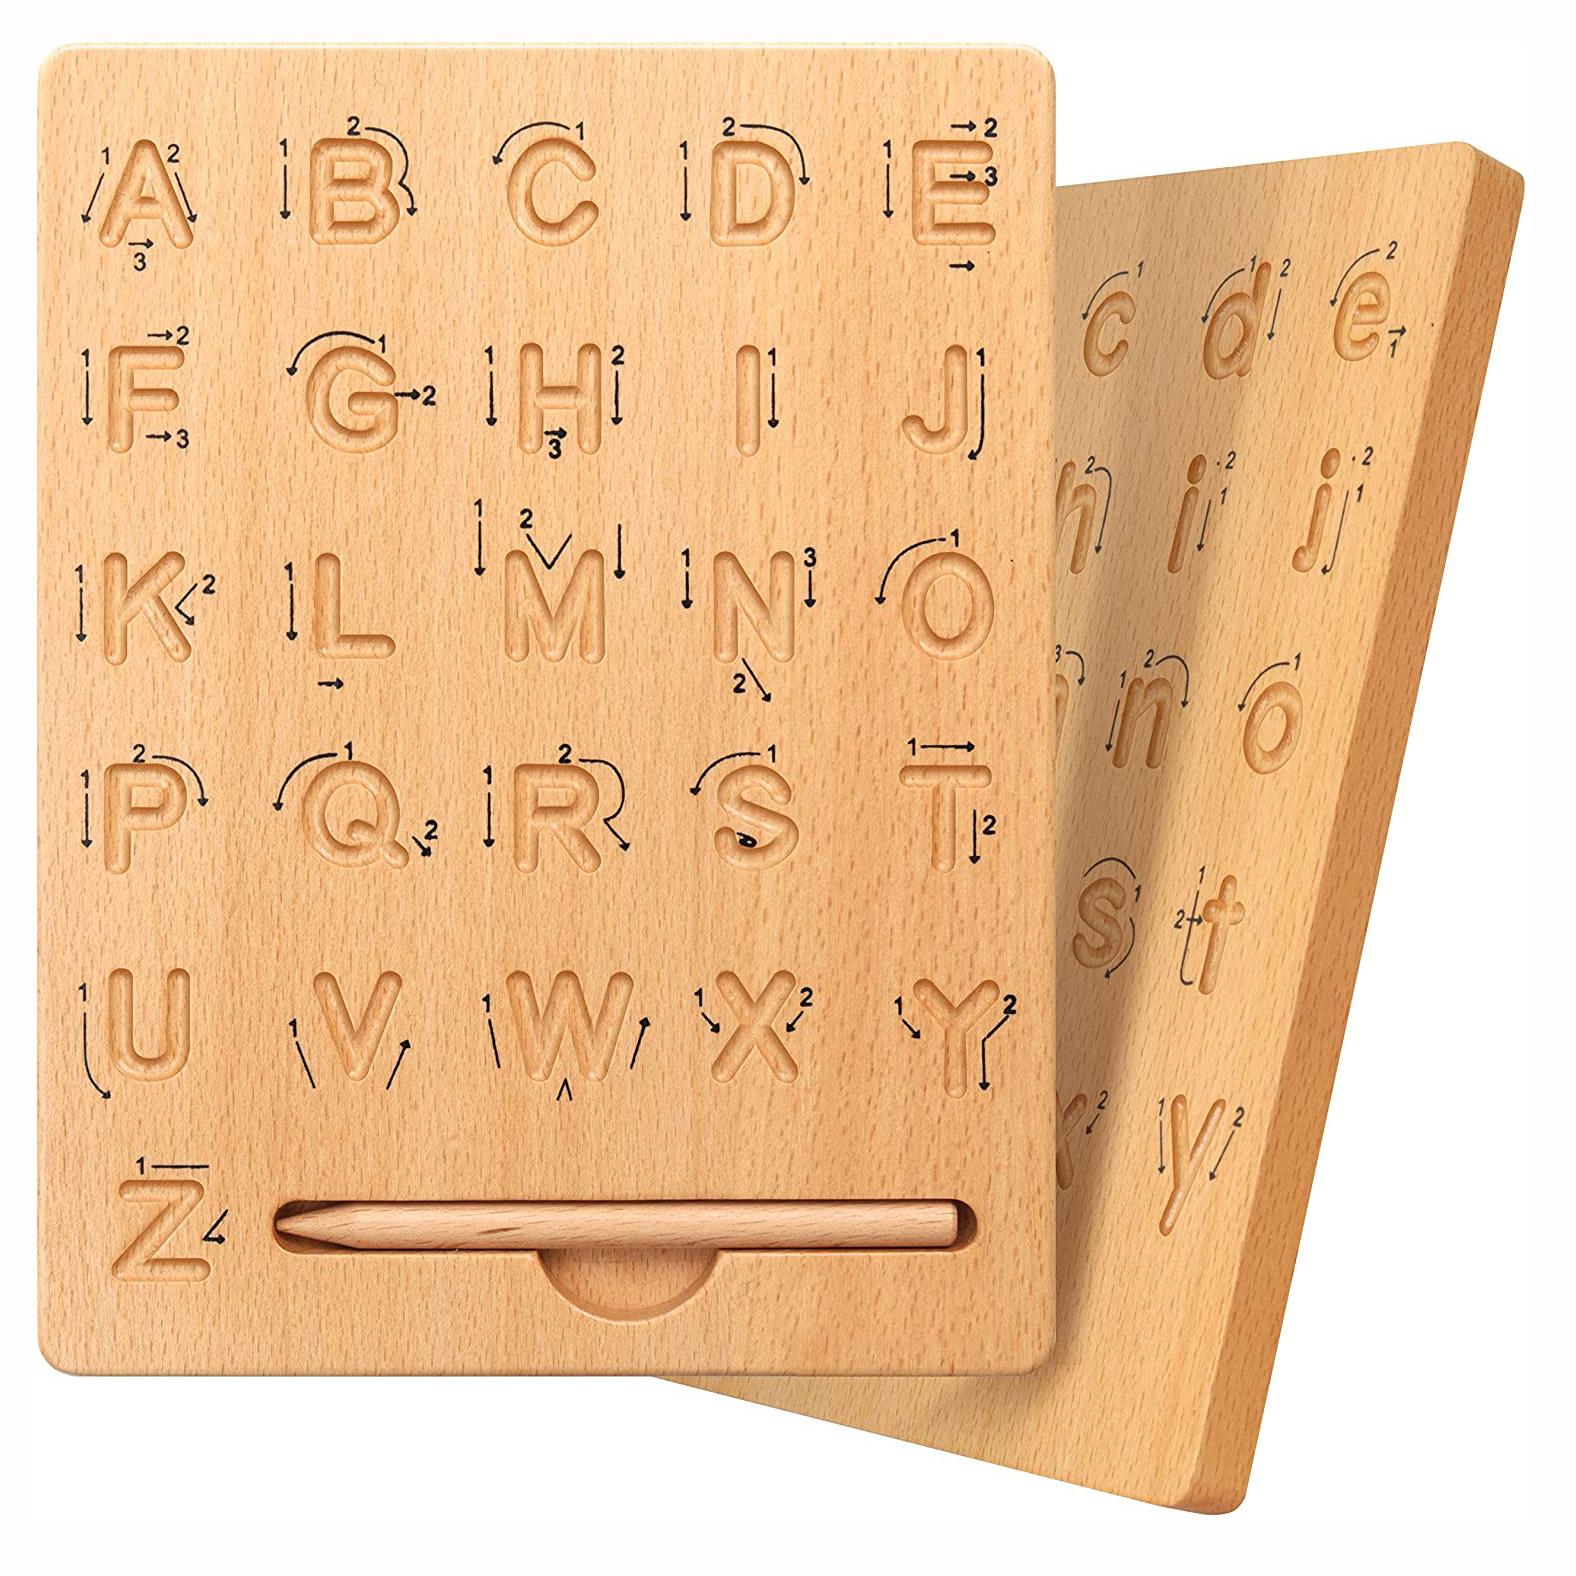 FourAll-Toys, Kids & Baby Wooden Letters Practicing Board,Double-Sided Alphabet Tracing Tool Learning to Write ABC Educational Toy Game Fine Motor Montessori Gift for 4 5 Years